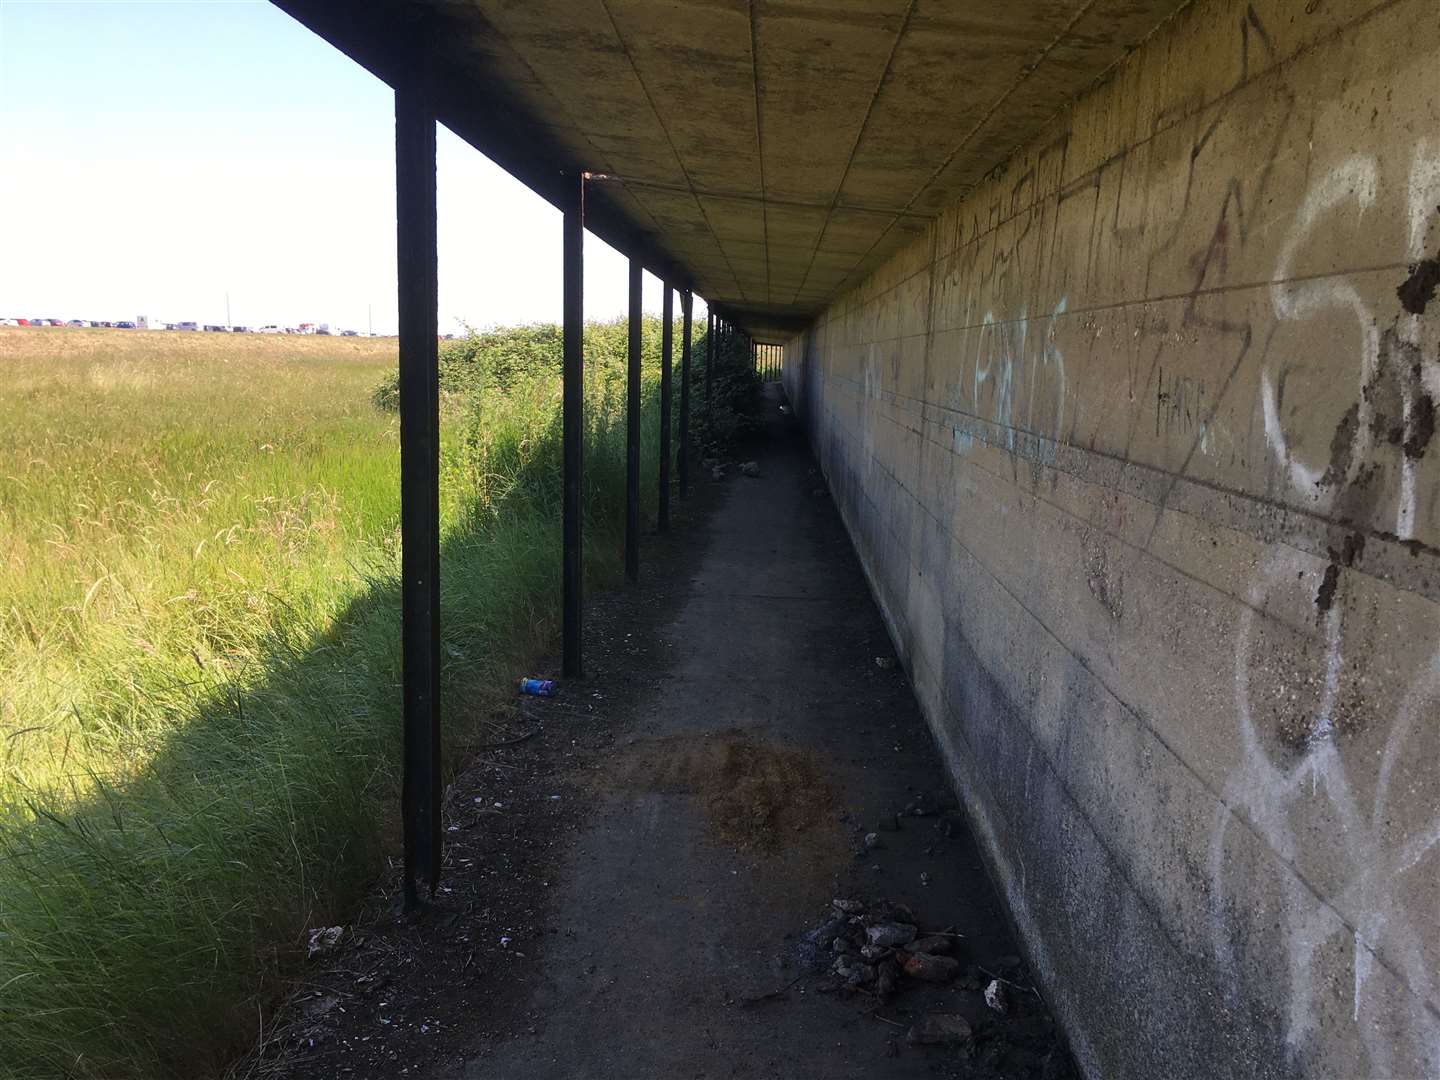 The 'covered way' at Barton's Point Coastal Park, Sheerness, protected the public from being shot during tests at the Queenborough Lines firing range during the war. But now it is in a sorry state as its iron supports rust and its concrete roof crumbles. Picture: John Nurden